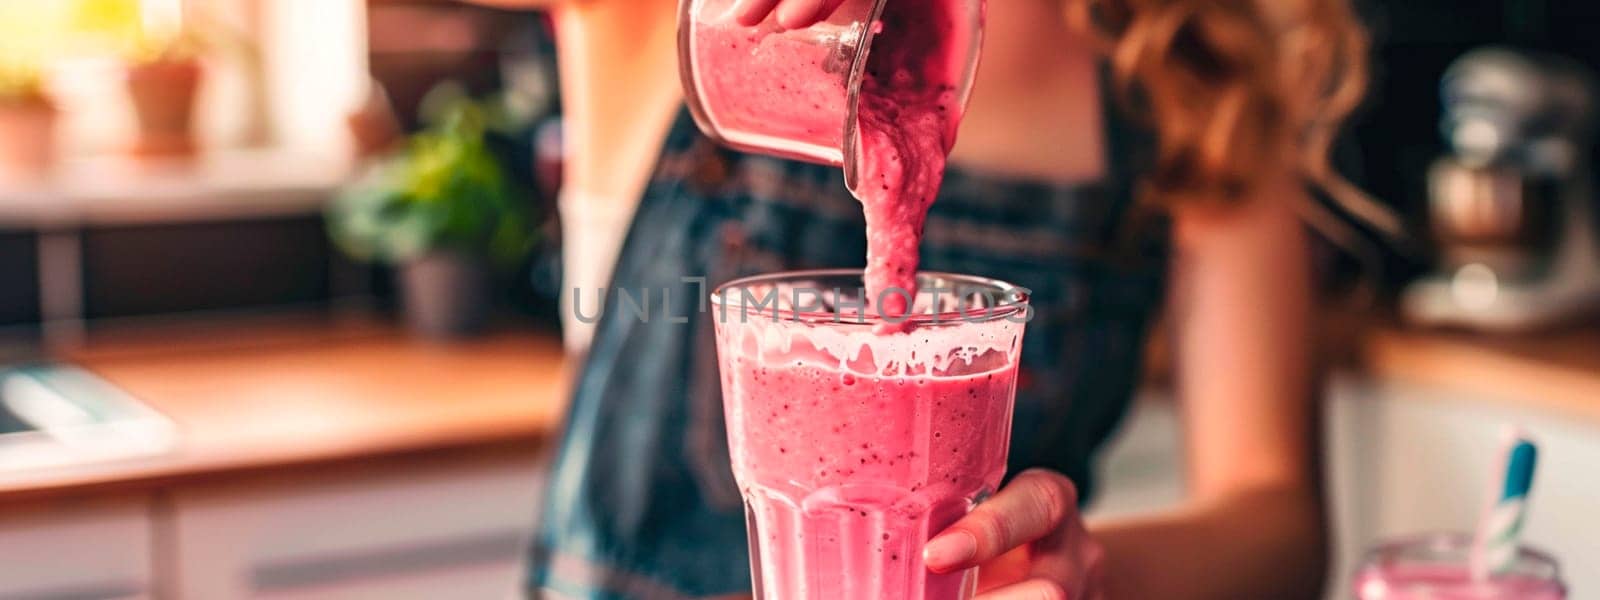 woman making berry smoothie in the kitchen. selective focus. people.